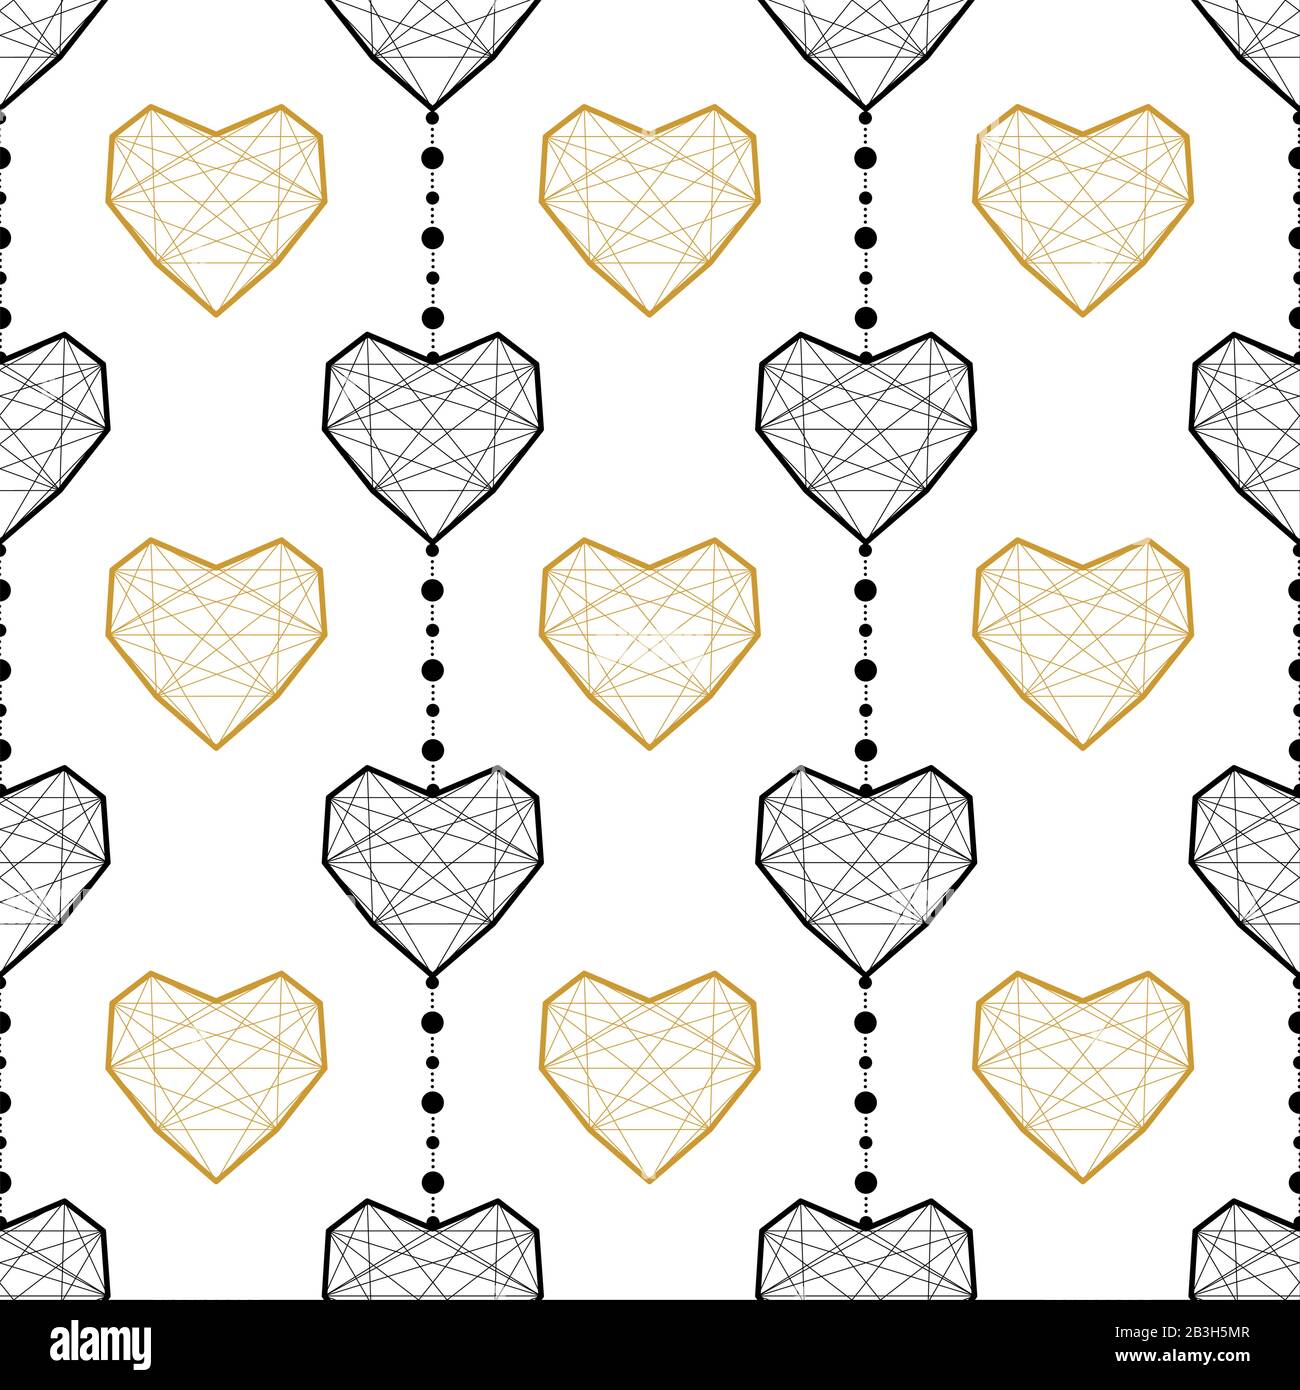 Abstract Vector Seamless Geometric Pattern Of Golden Hearts And Black Hearts Connected By Vertical Stripes Of Round Beads. Stock Vector